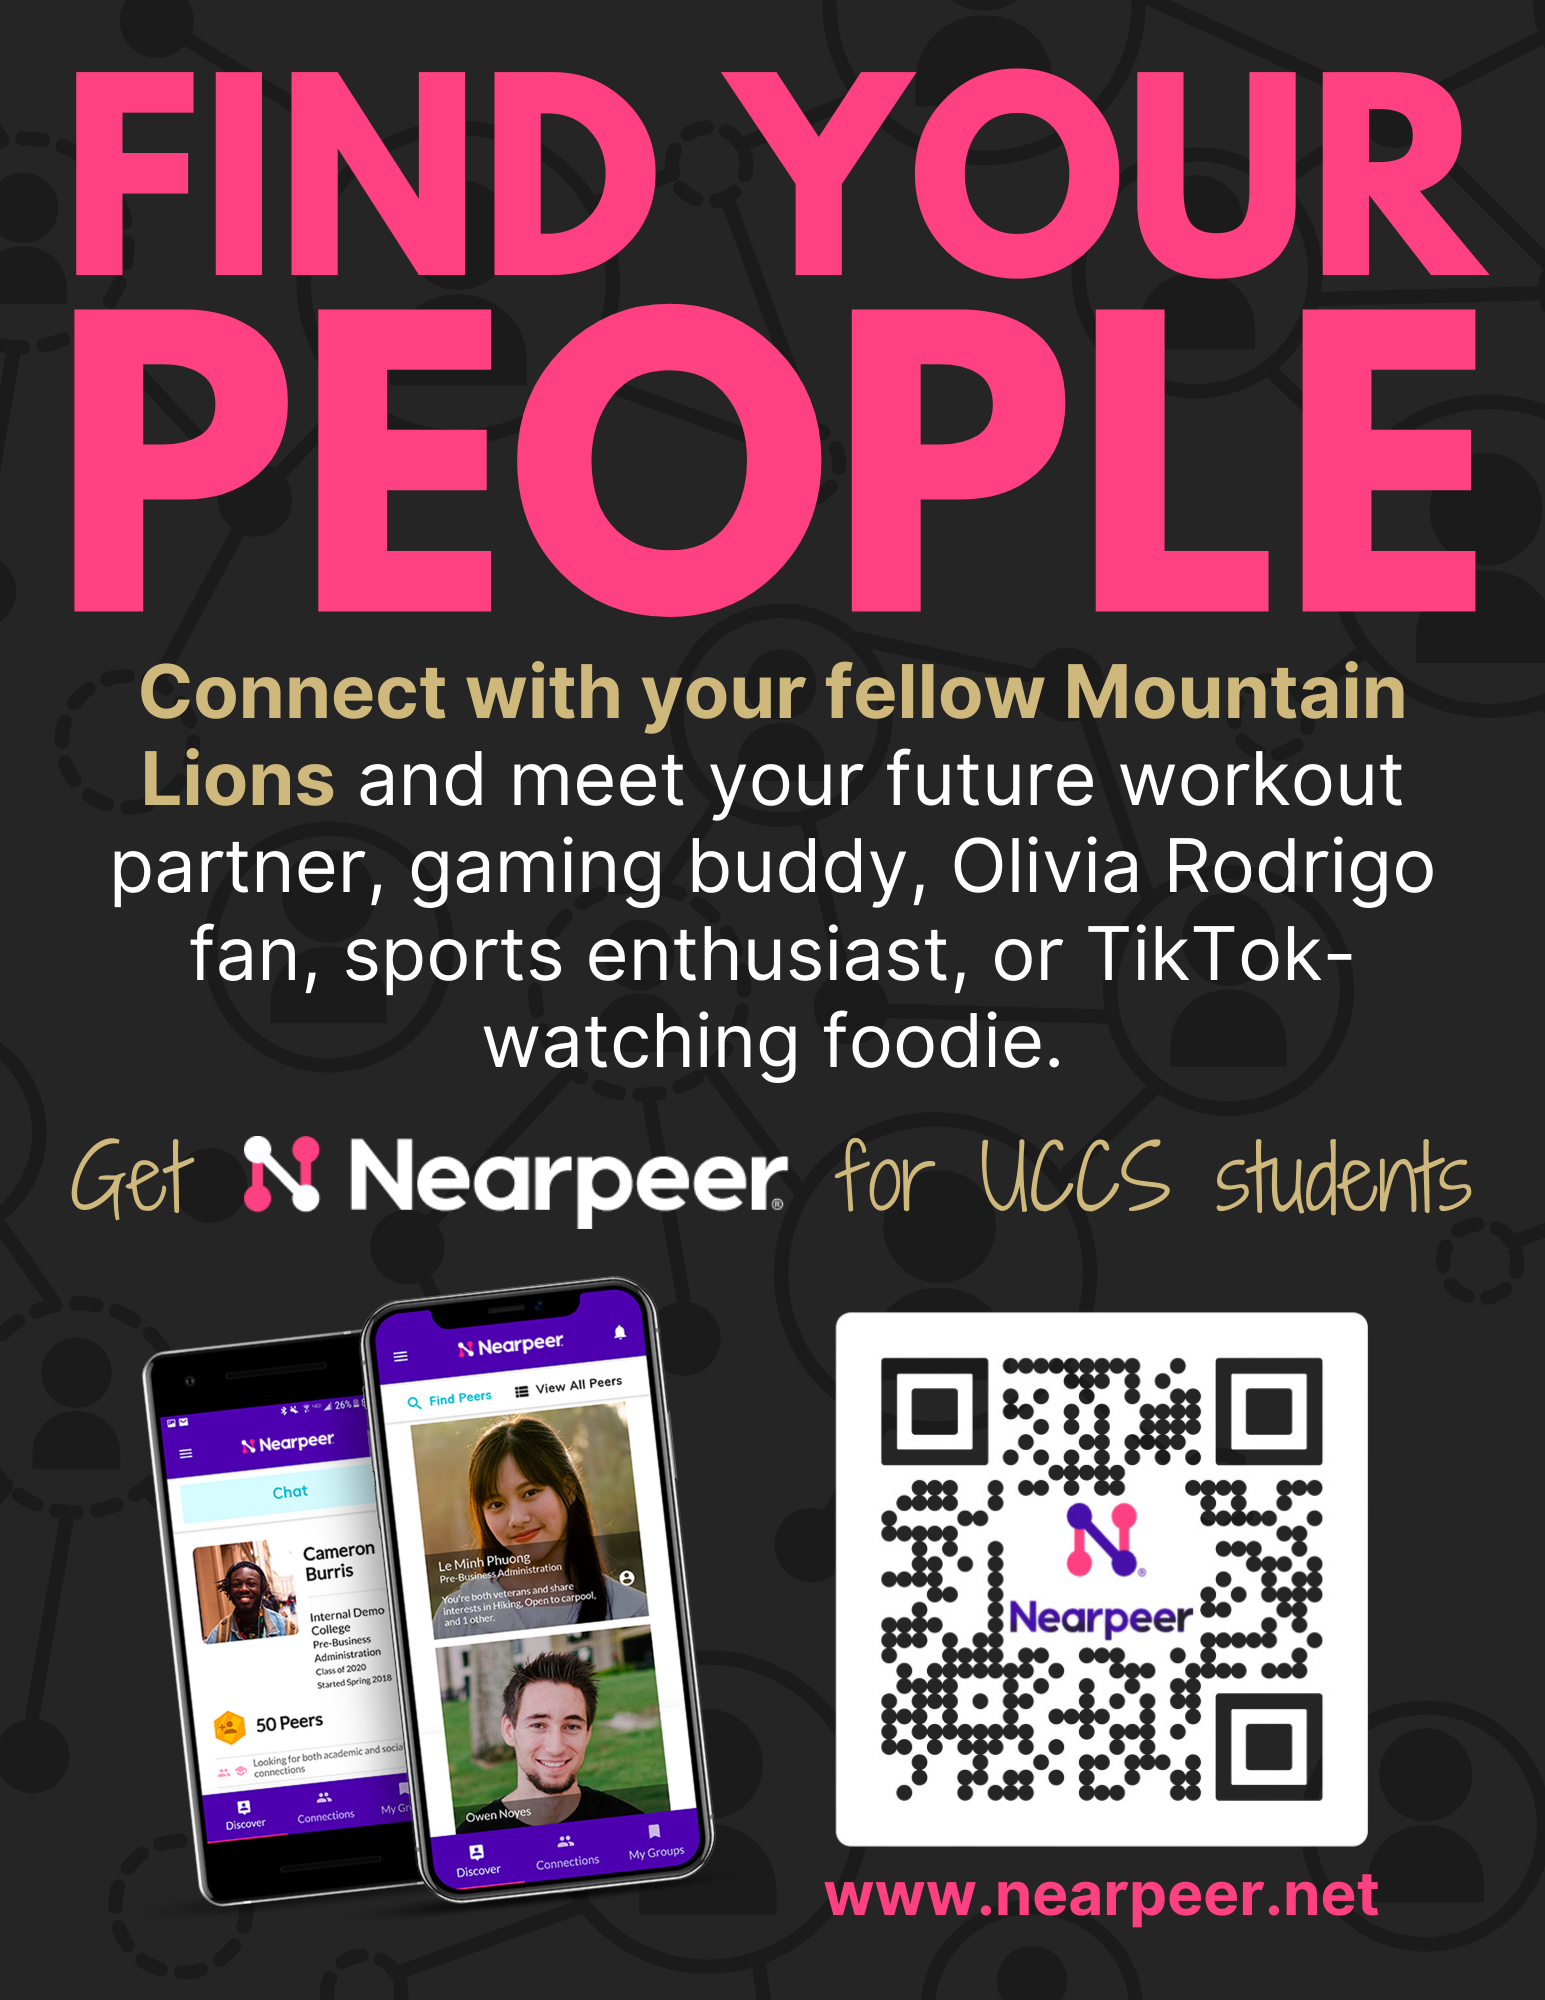 Find your people. Connect with your fellow mountain lions and meet your future workout partner, gaming buddym Olivia Rodrigo fan, sports enthusiast, or TikTok watching foodie. Get Nearpeer for UCCS students.